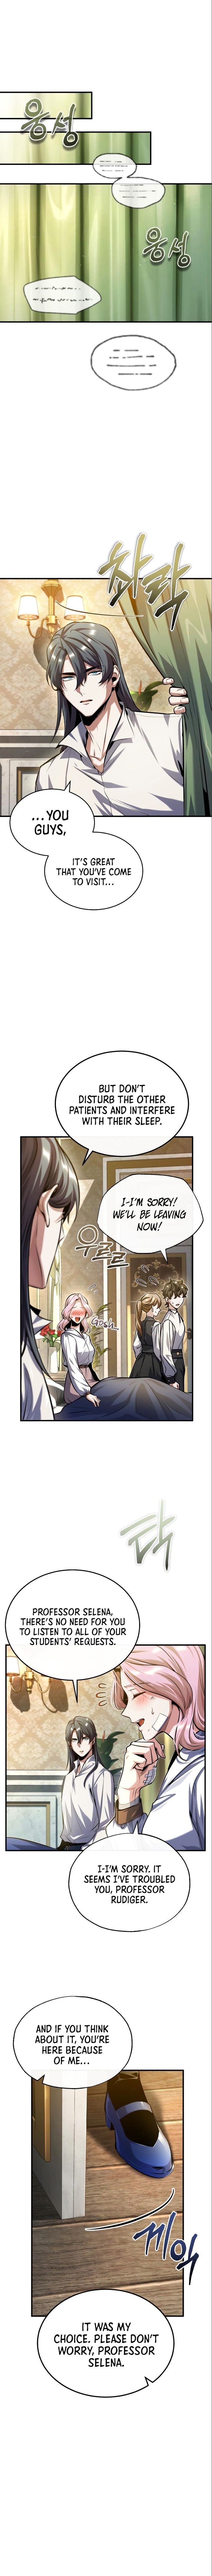 Academys Undercover Professor Chapter 73 Page 8